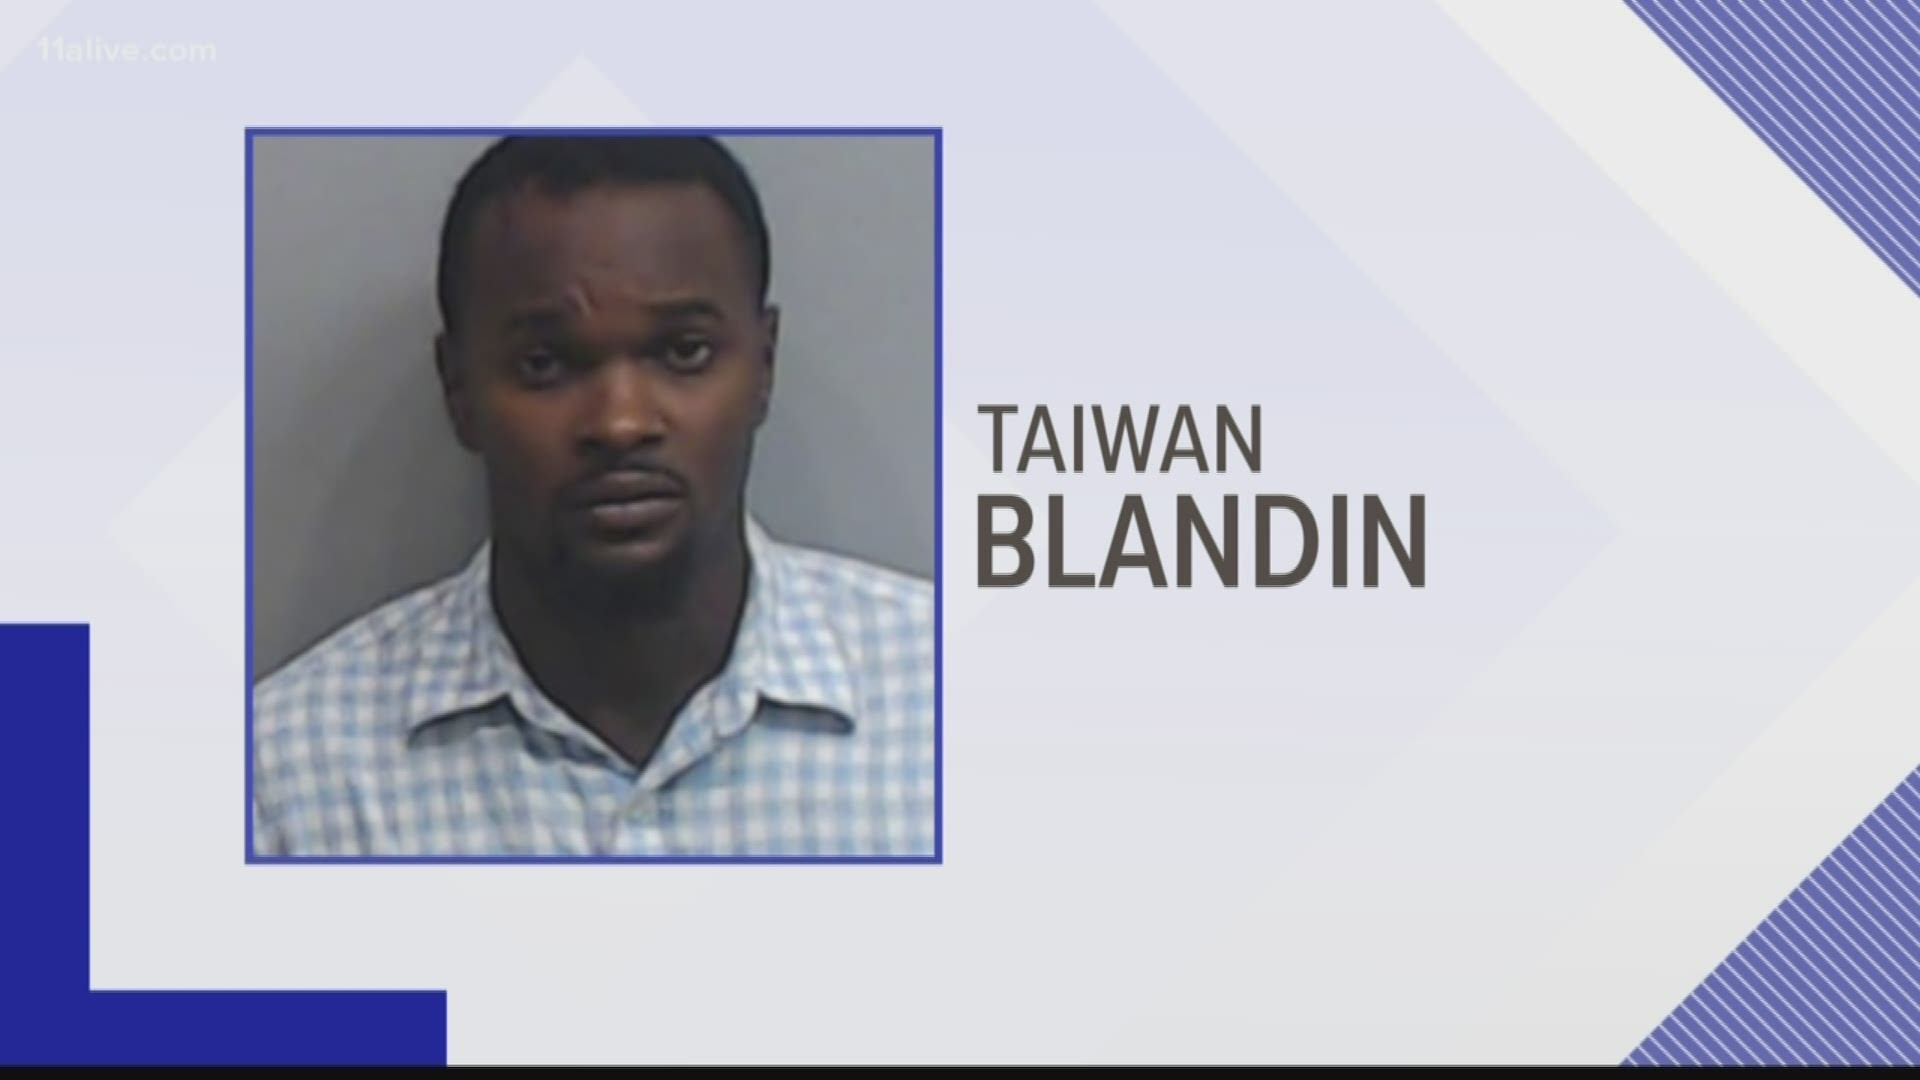 Taiwan Blandin allegedly tried to get away, but eventually lost control and crashed.